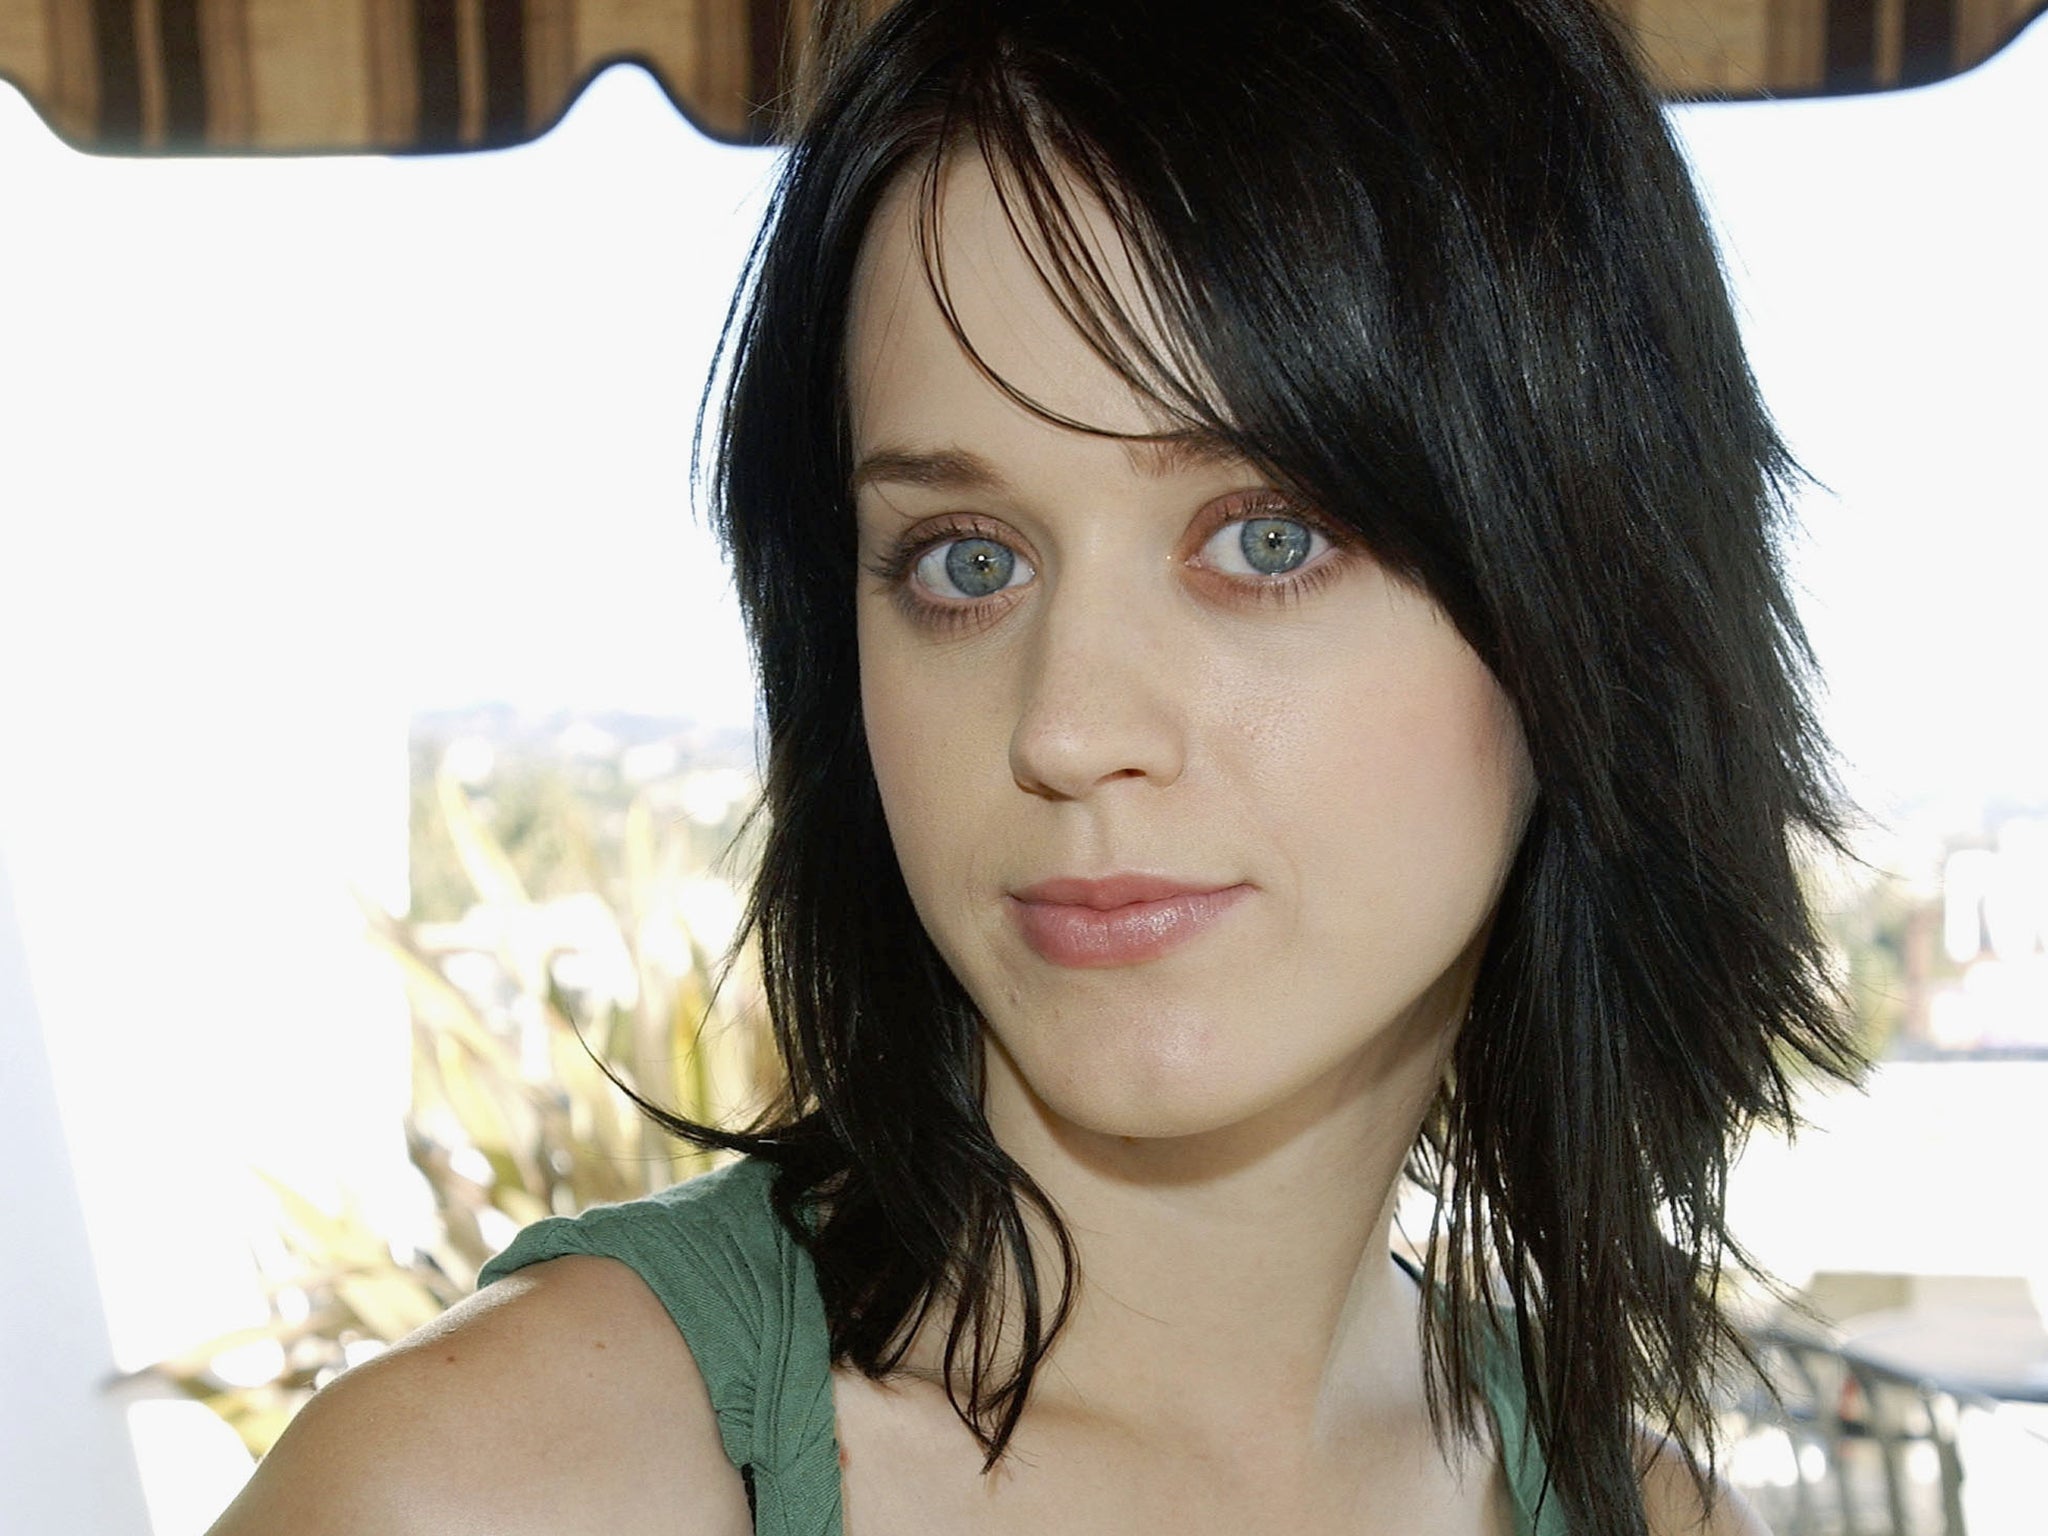 Katy Perry was known as Katy Hudson during her Christian rock days